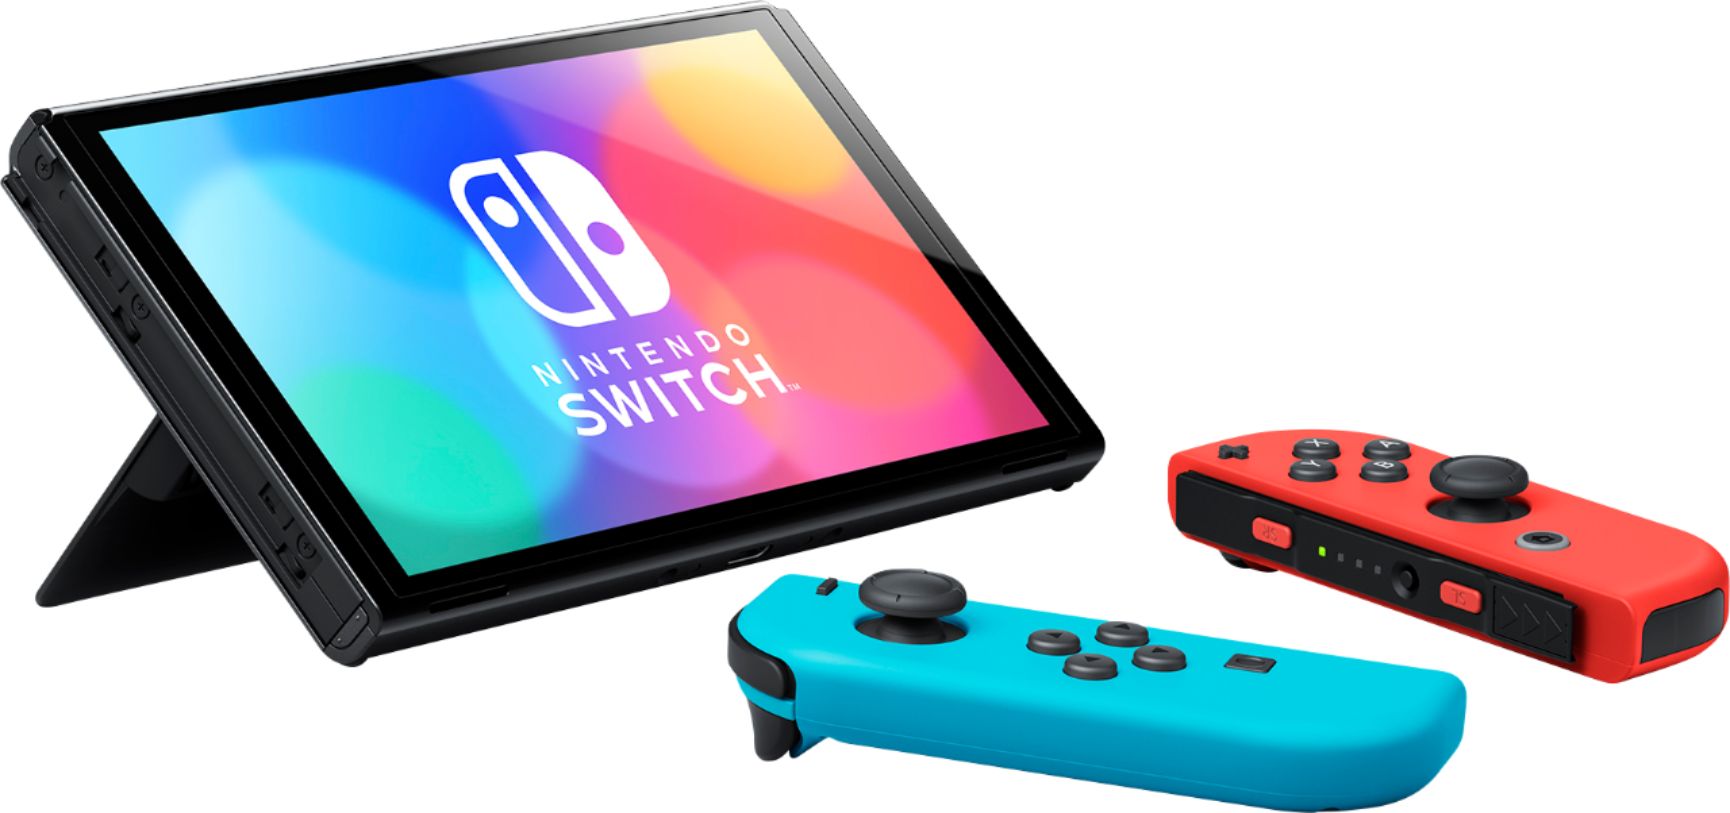 2022 New Nintendo Switch OLED Model Neon Red & Blue Joy Con 64GB Console HD Screen & LAN-Port Dock with 1-2 Switch, Mytrix Wireless Switch Pro Controller and Accessories